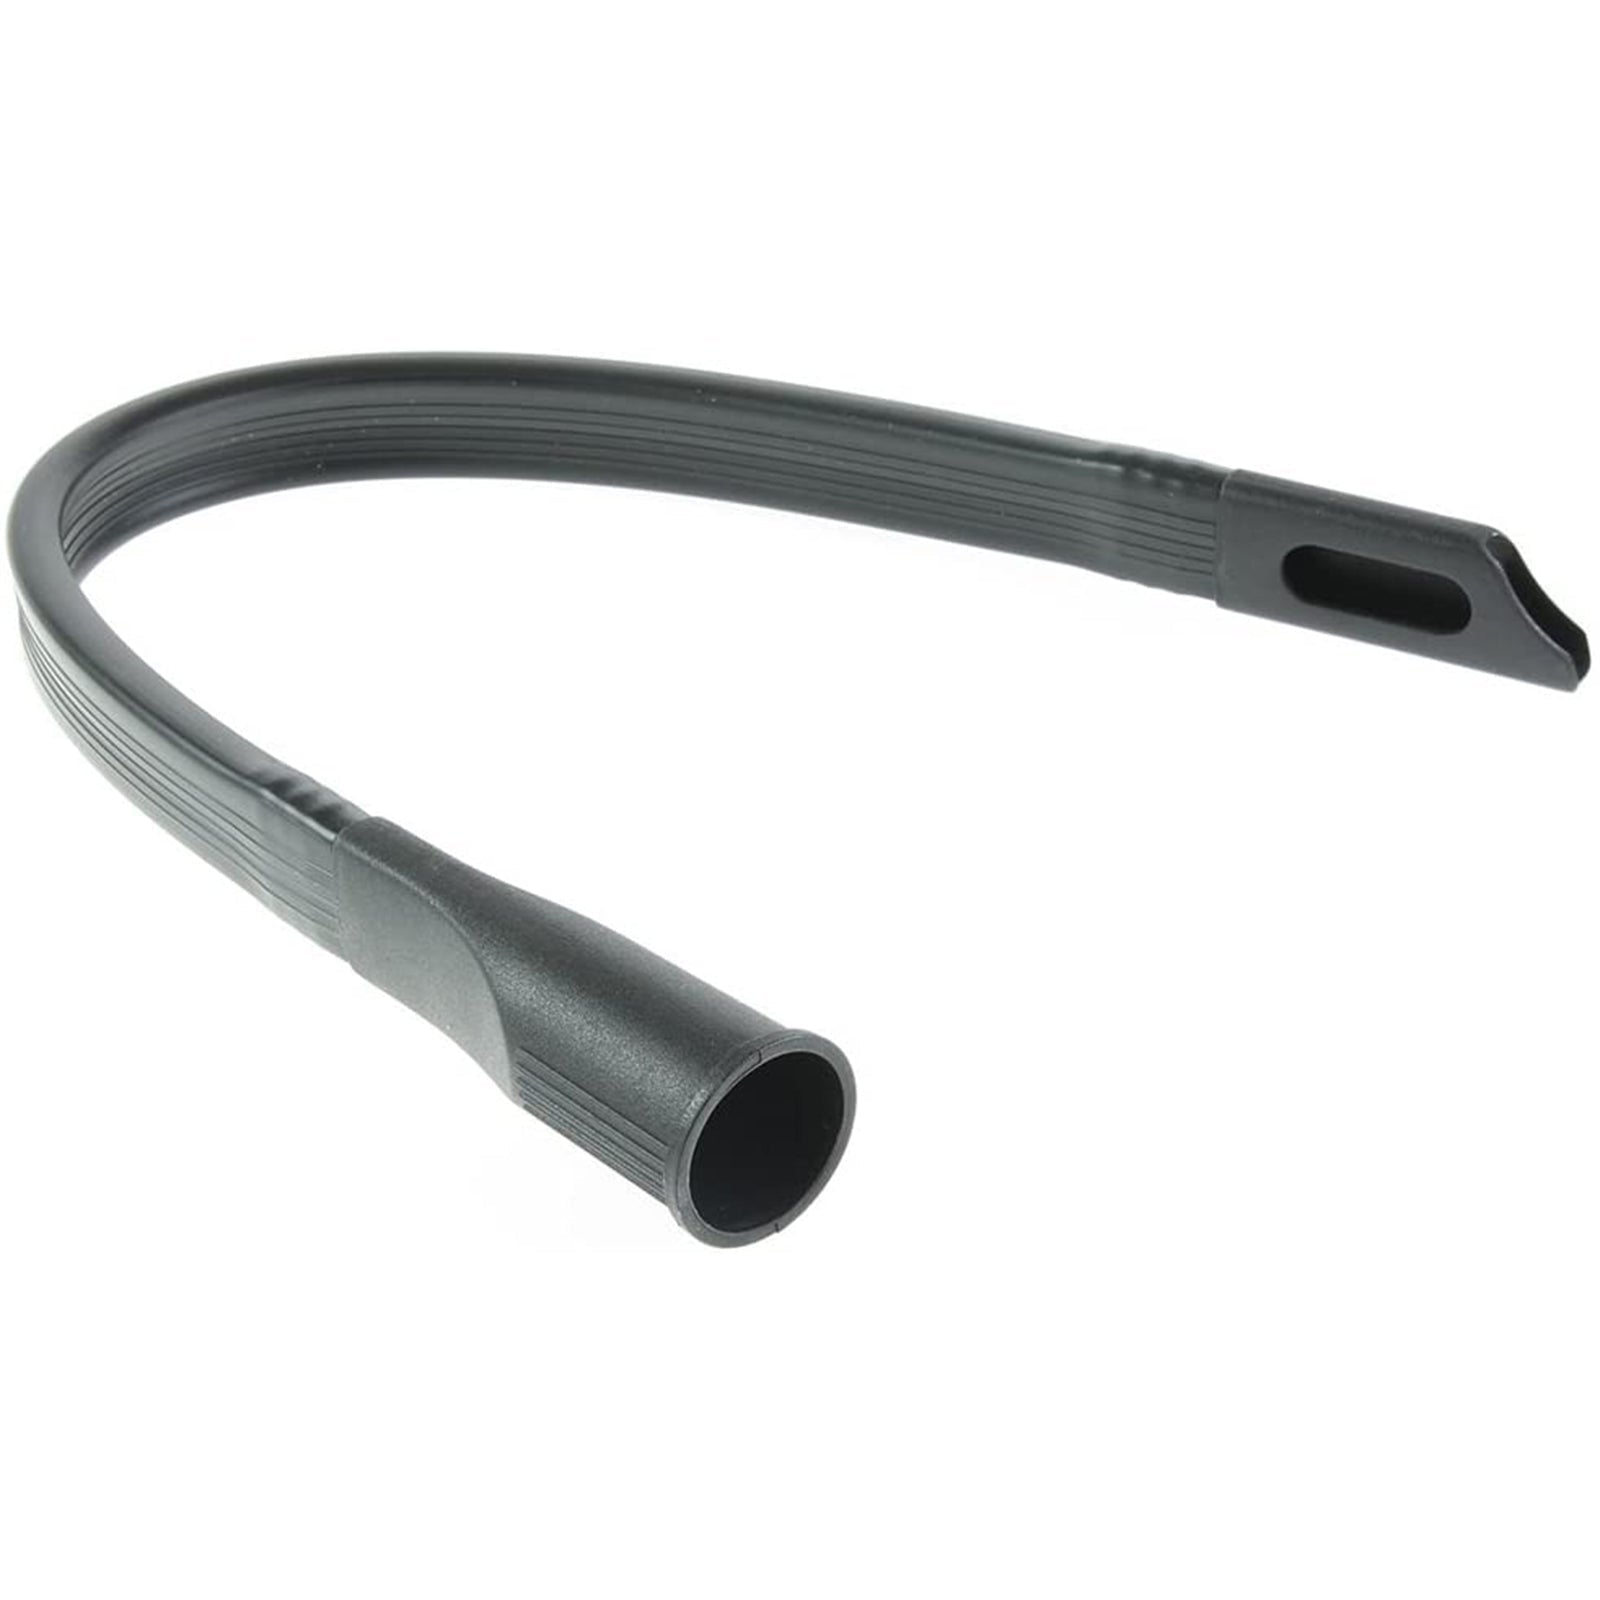 Flexible Crevice Tool Extra Long compatible with HOOVER Vacuum Cleaner (32mm)